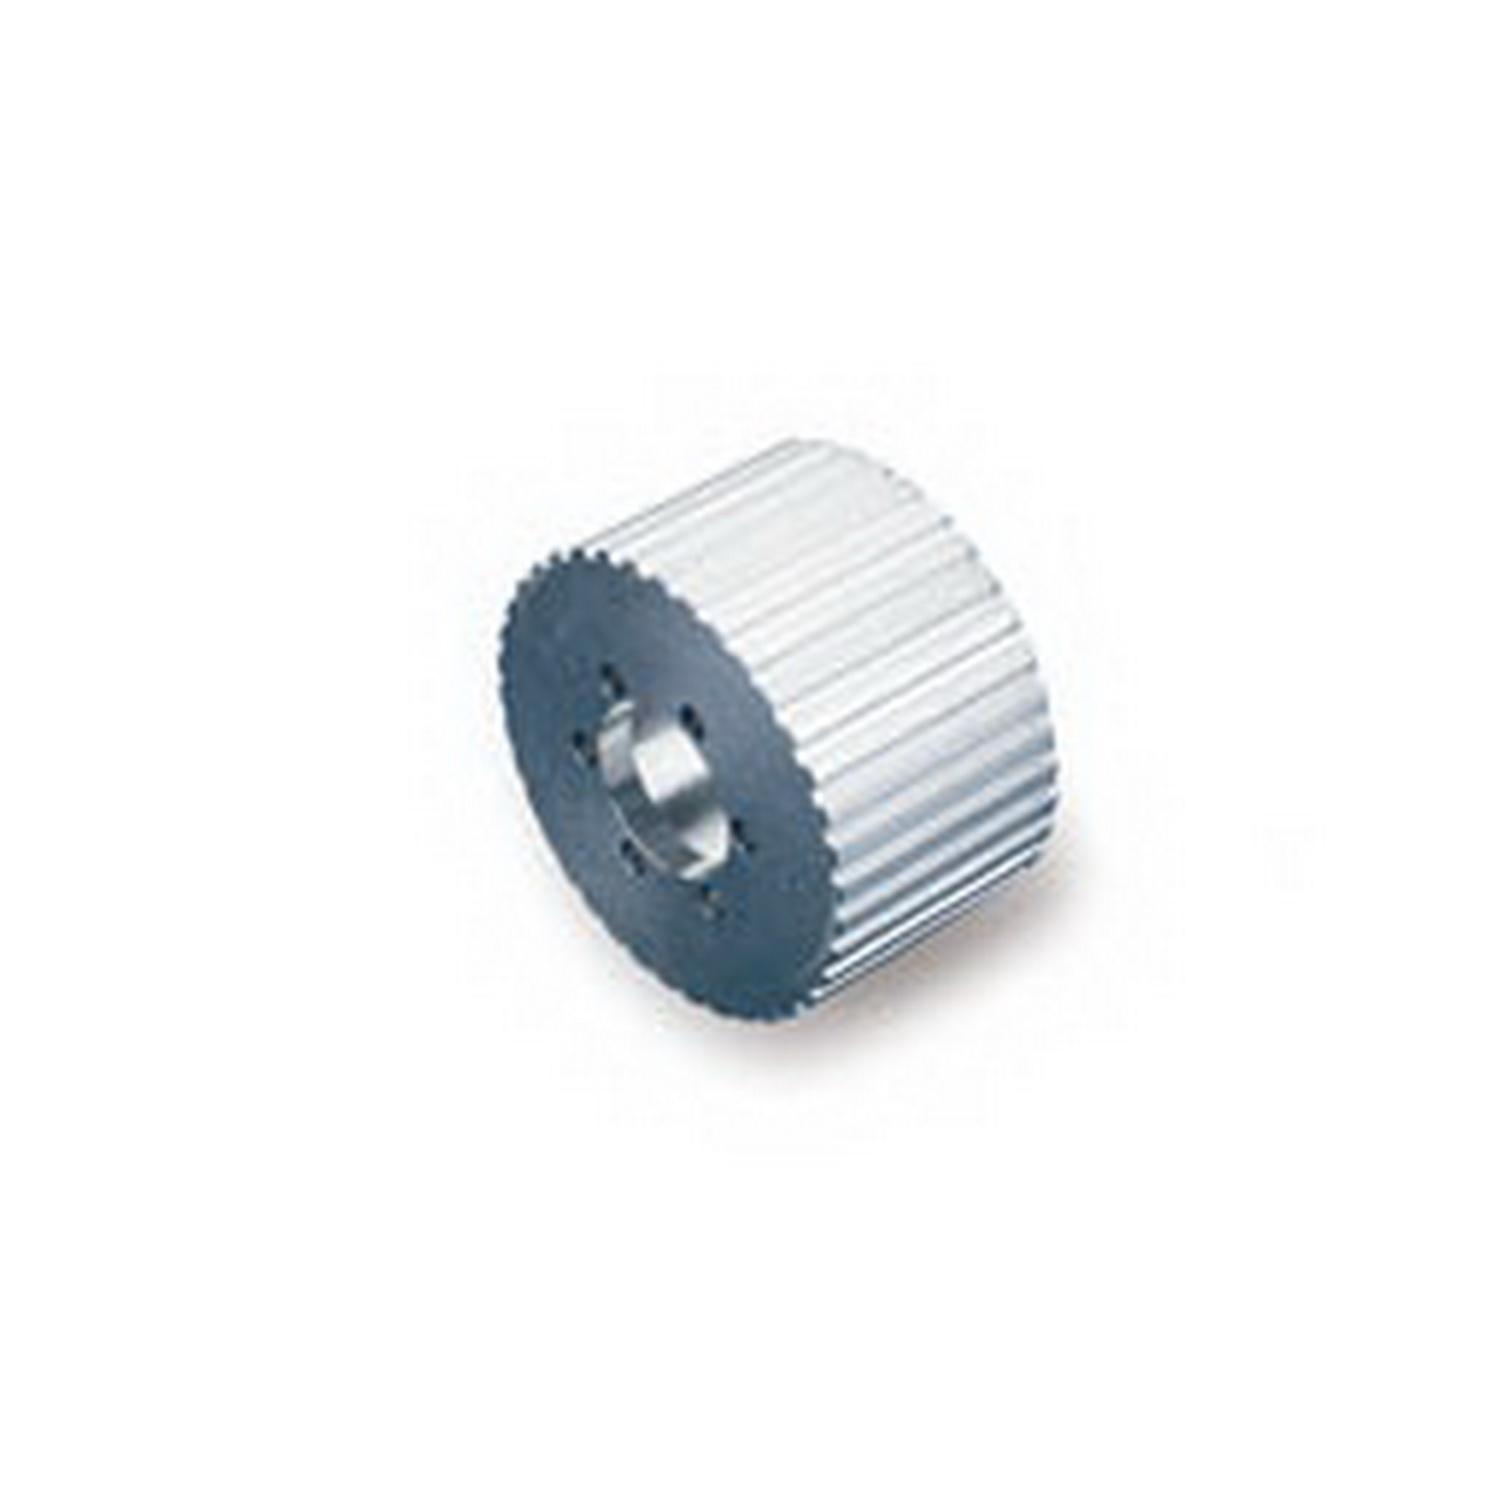 Weiand Weiand 7029-36 0.5 in. Pitch Drive Pulley